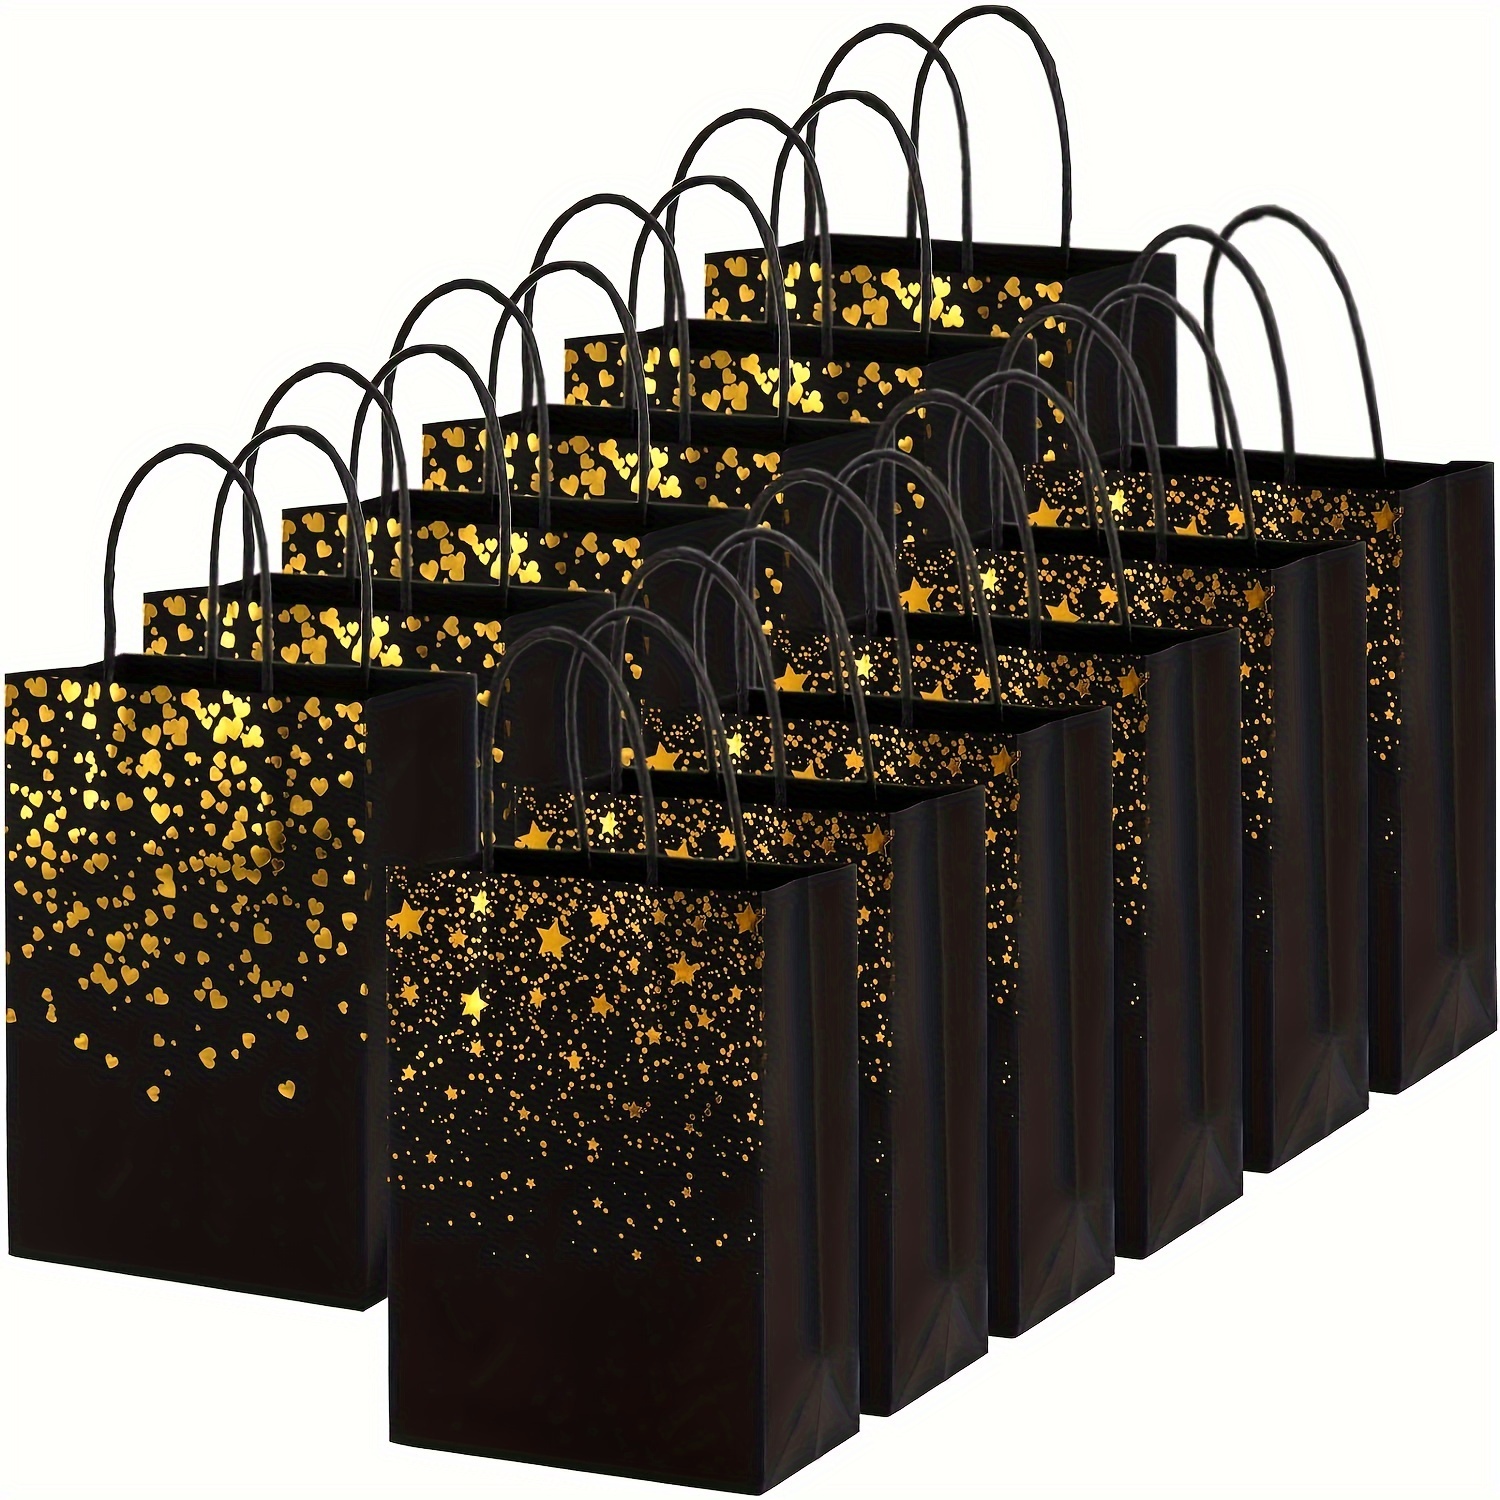 

50pcs Paper Gift Bags, Black Gold Gift Bags Shopping Bags Bulk Kraft Paper Bag Party Favor Bags For Wedding Birthday Easter Mother's Day Grad Party